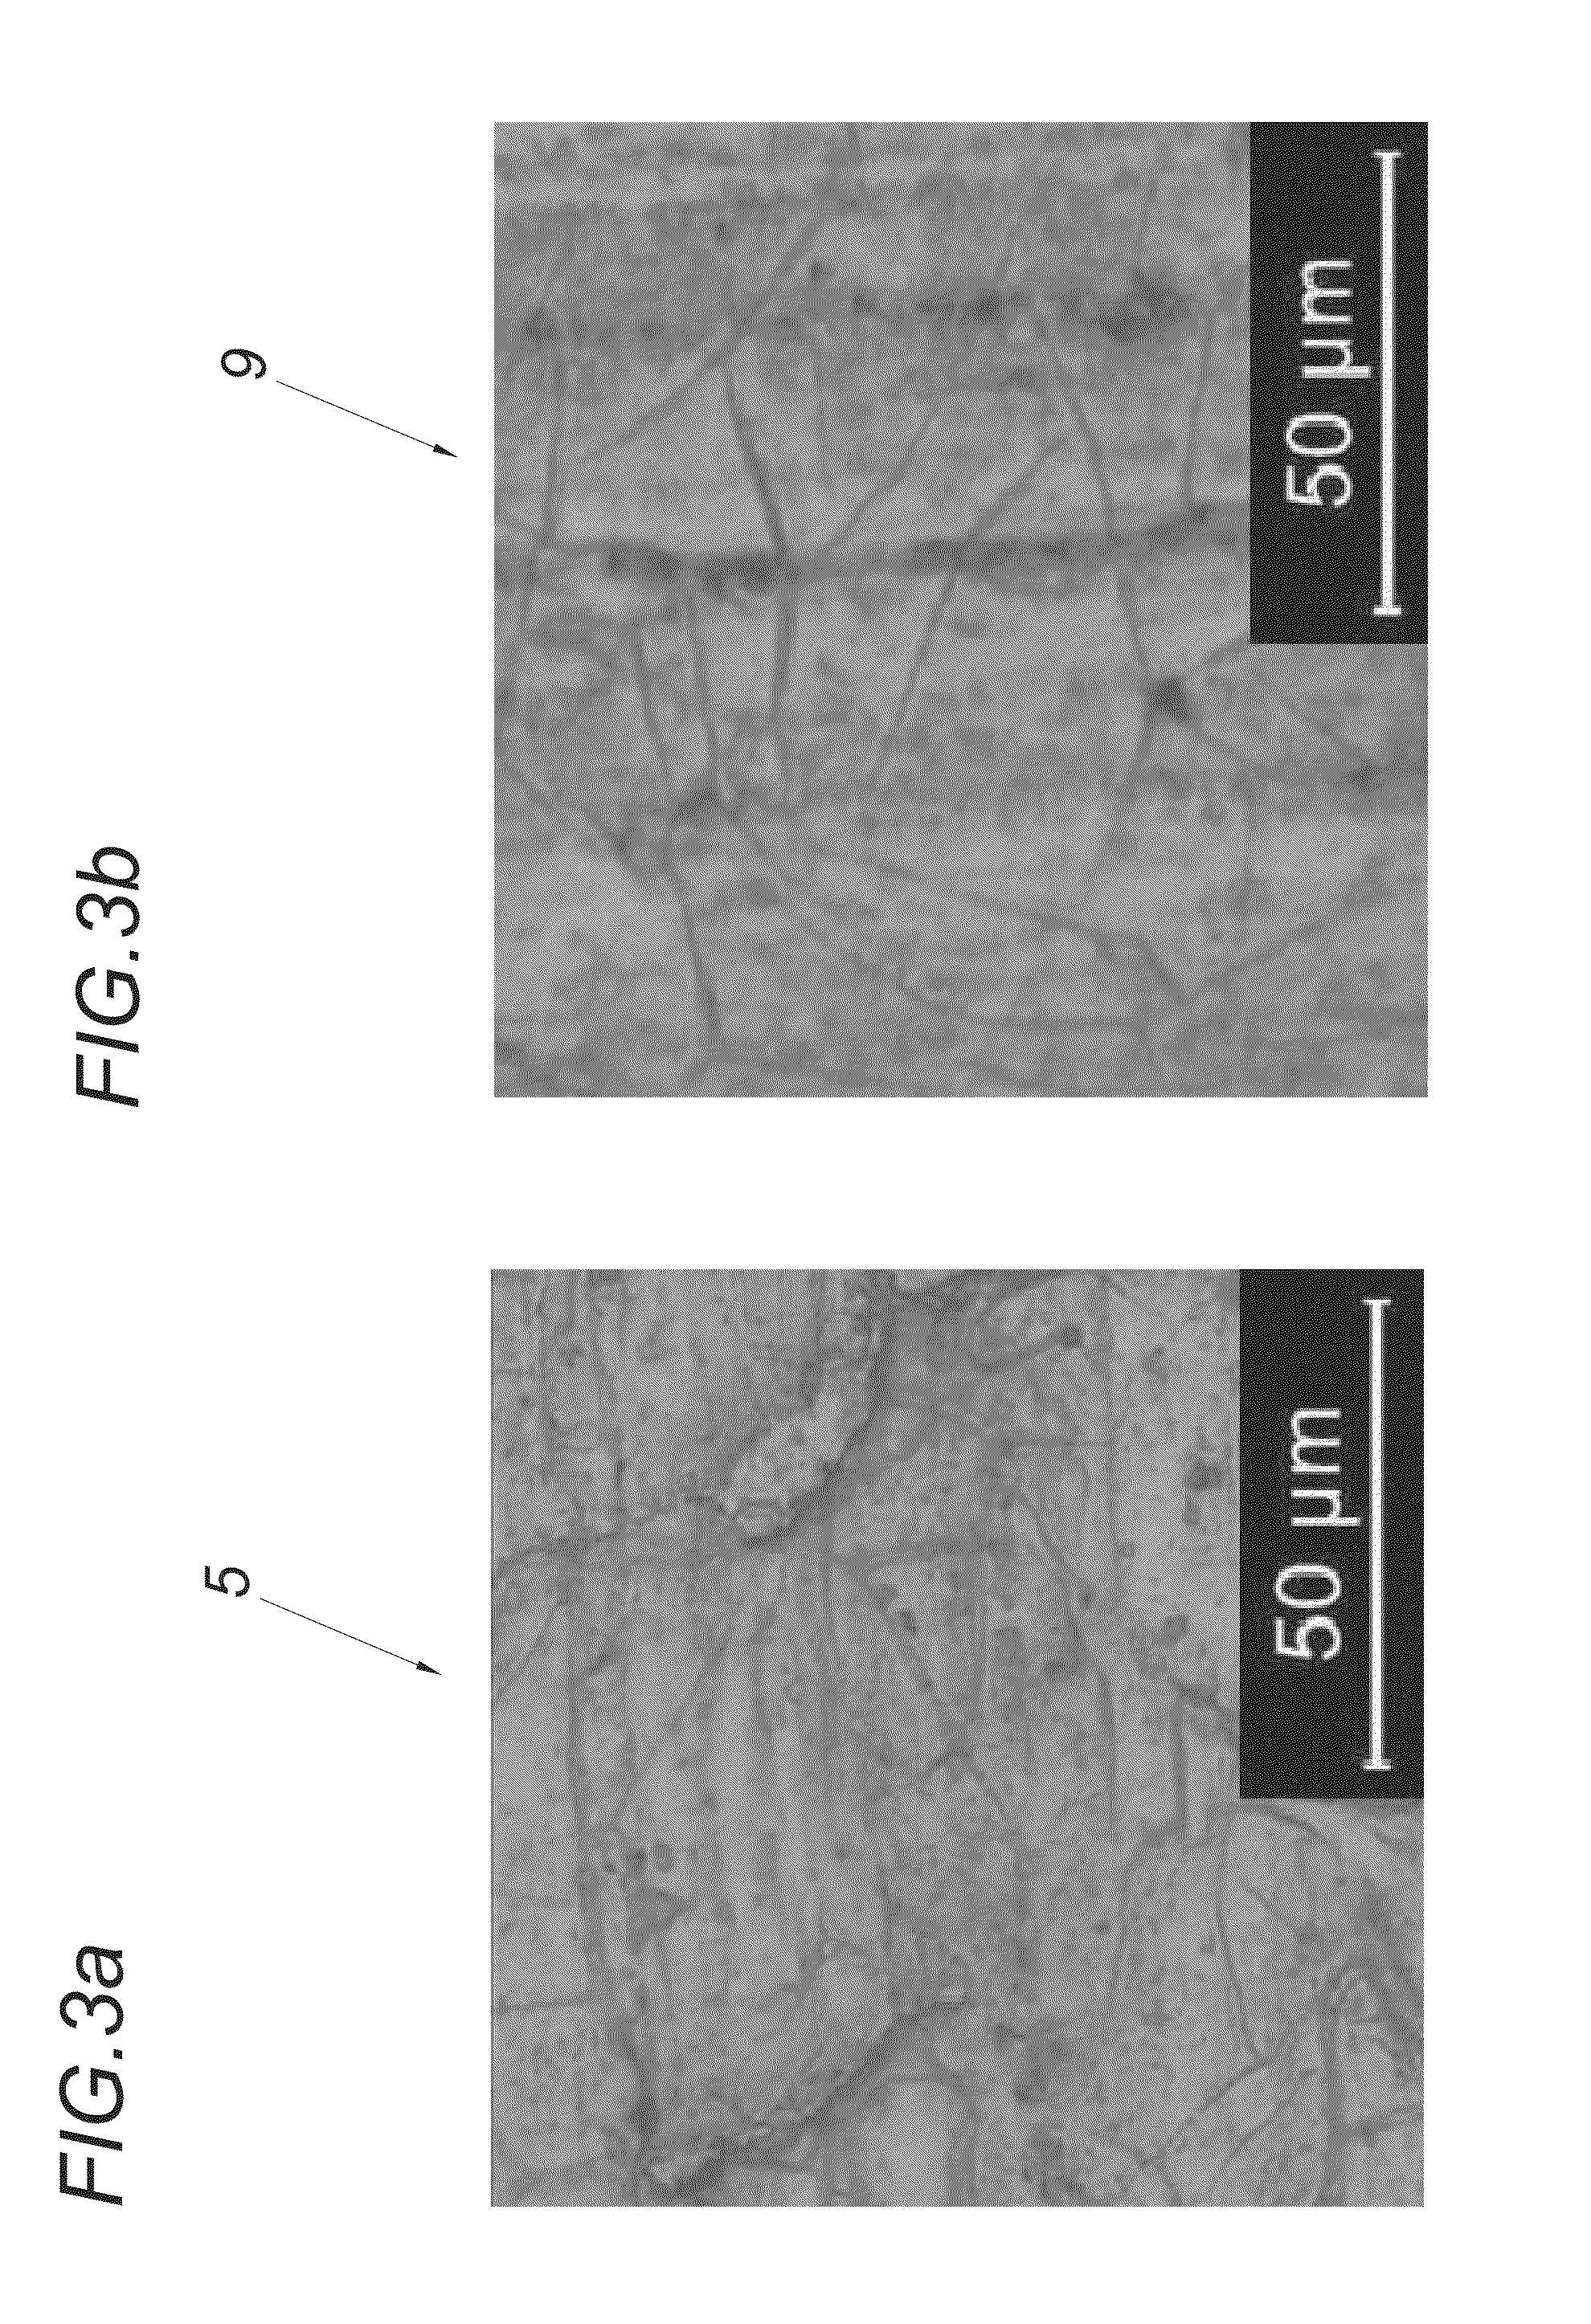 Method for treating the surface of a metallic substrate